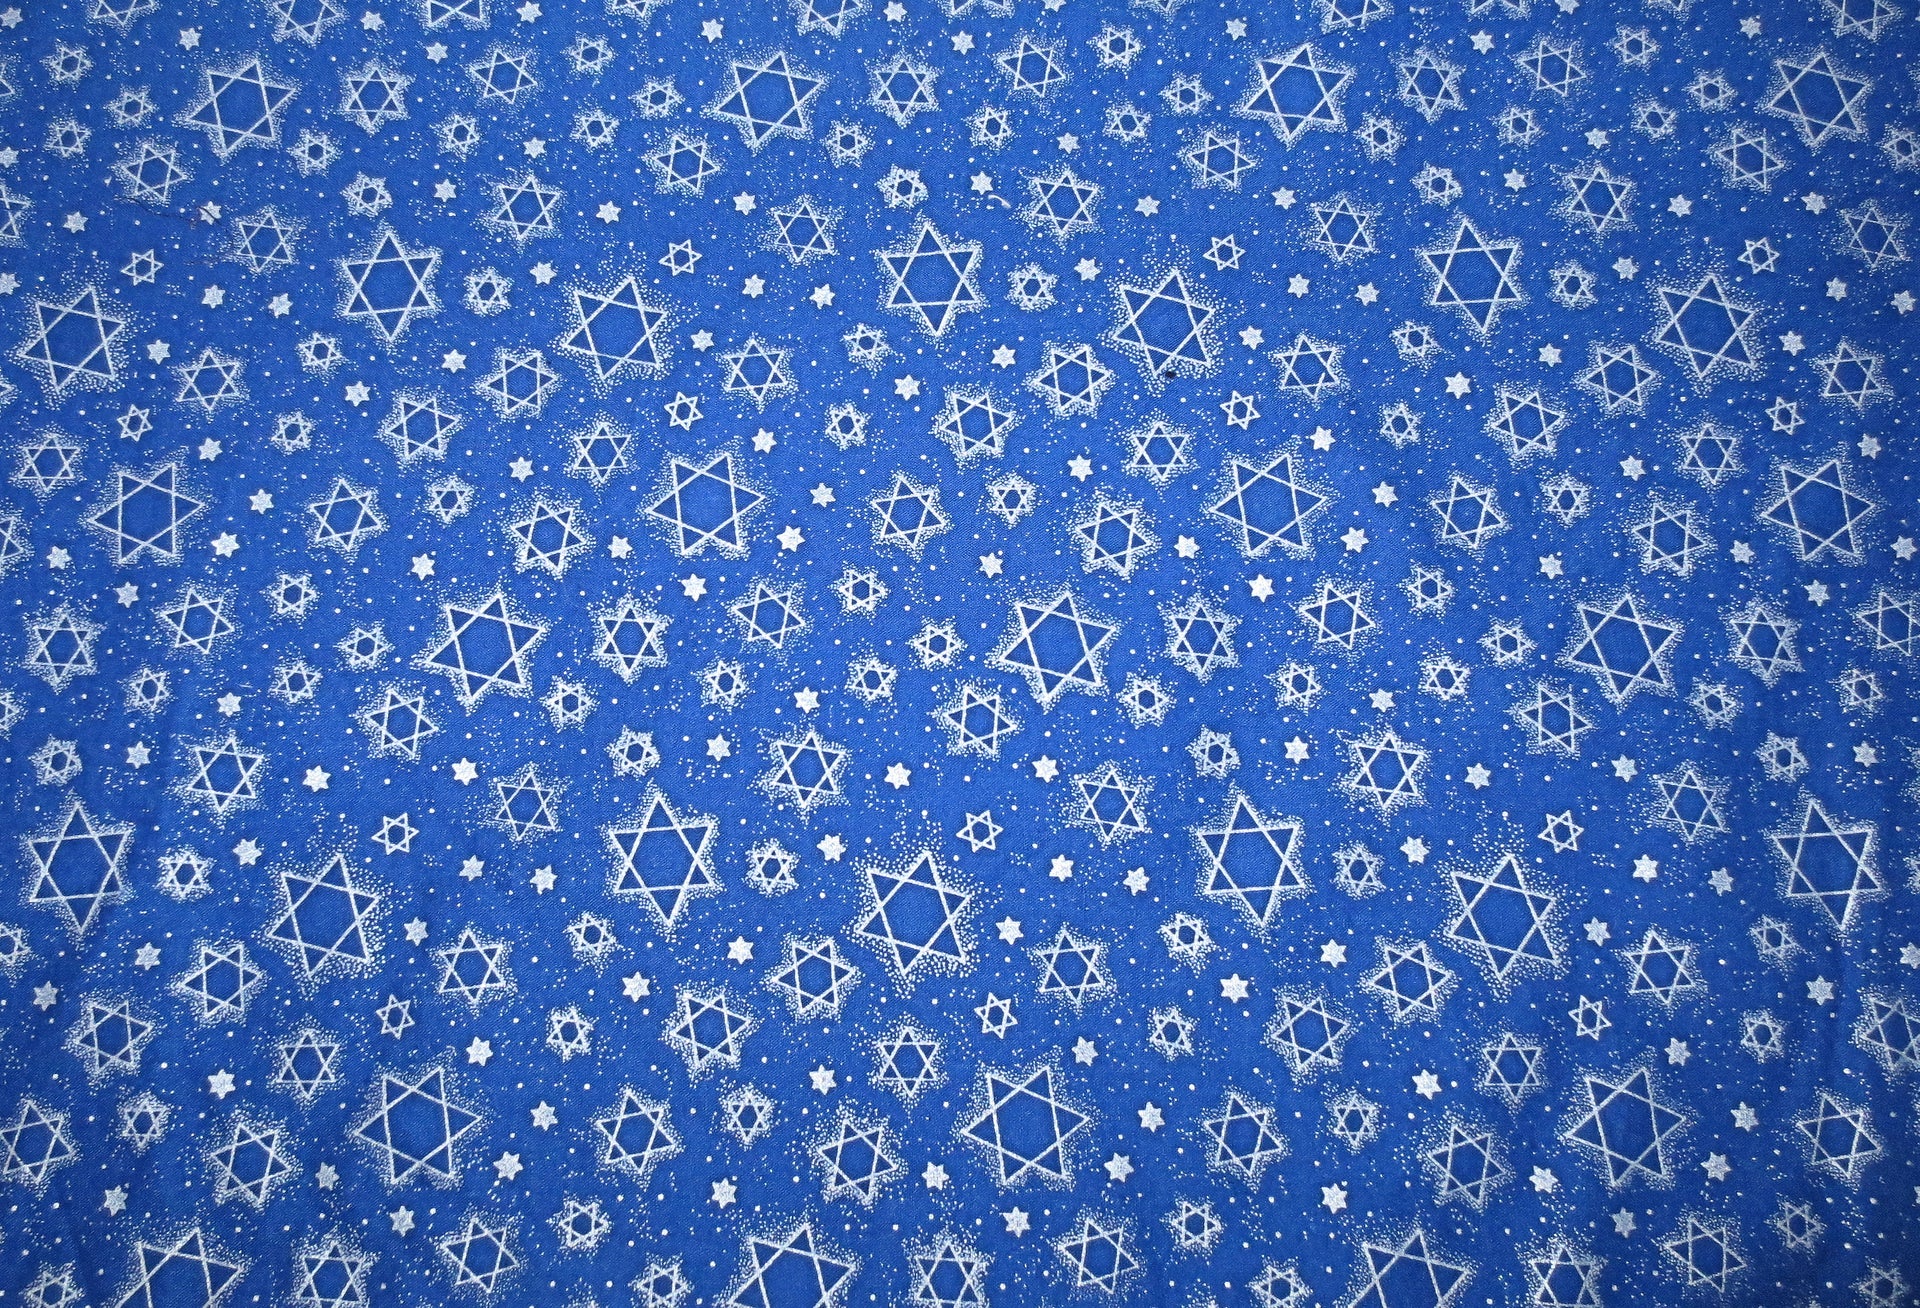 royal blue challah cover embroidered star of davids silver mother of pearl real button accents